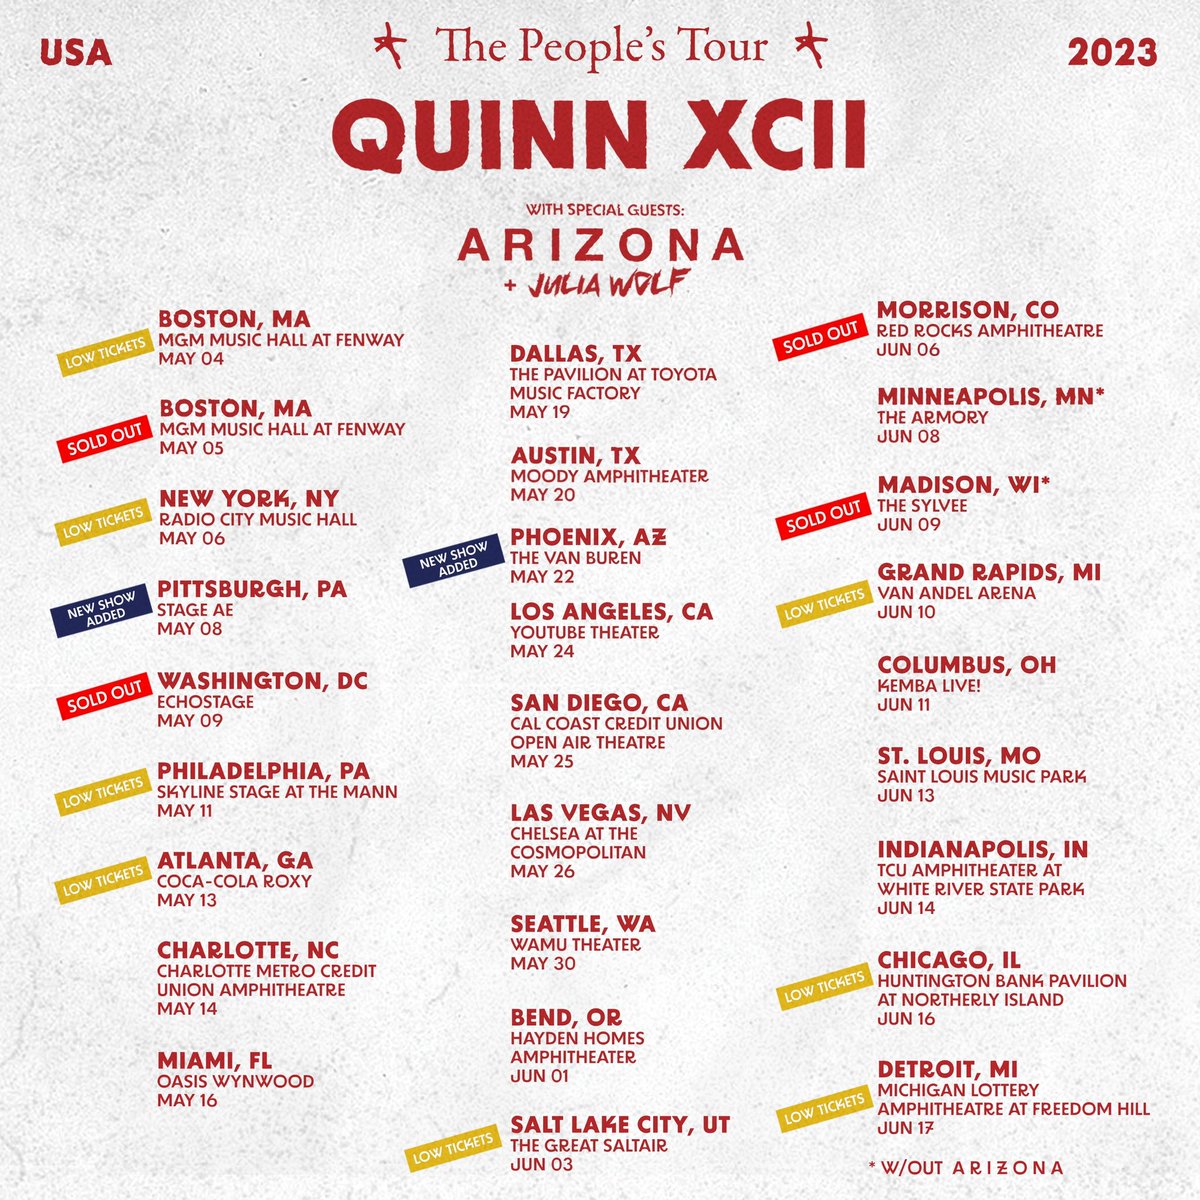 Don’t miss out on getting tickets to see us on tour with @quinnxcii & @juliawolfnyc! With our new album dropping May 12th, we will be playing a ton of new songs on this run. Come party us! Tickets are available on our website and also thepeoplestour2023.com 🪩🪩🪩